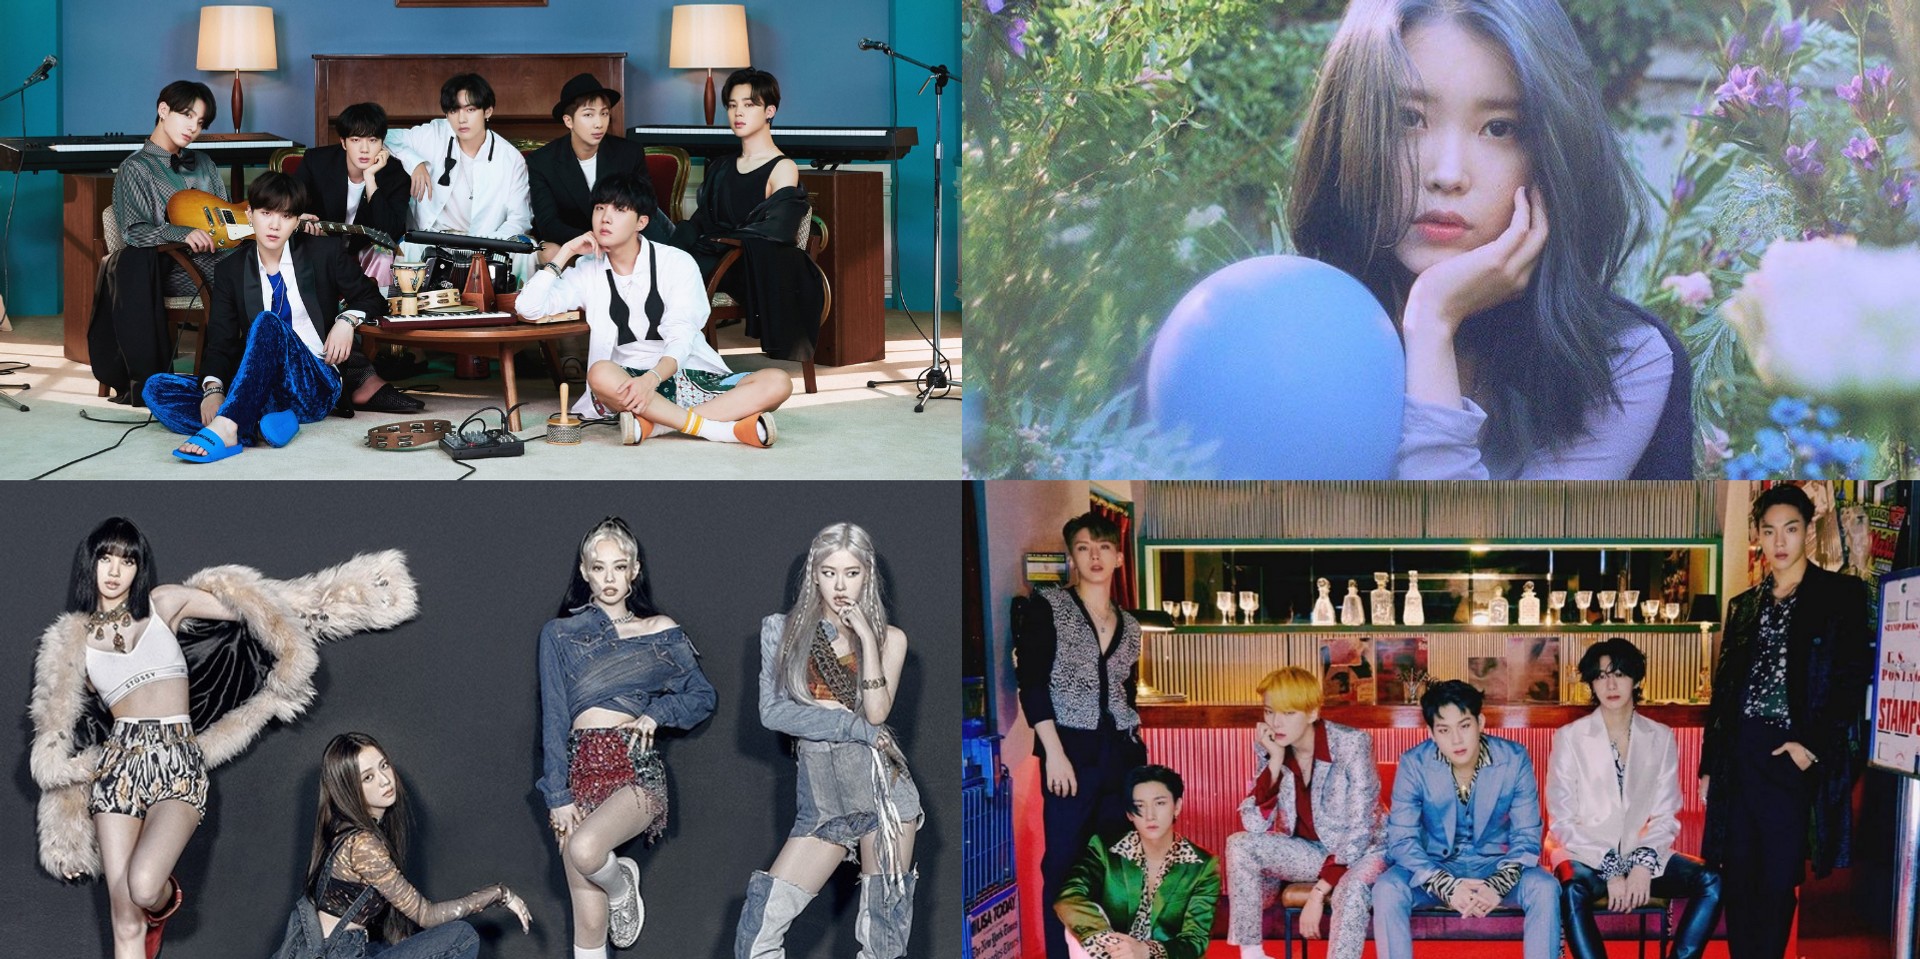 BTS, BLACKPINK, MONSTA X, IU, and more win at the 2020 Melon Music Awards - see the list of winners